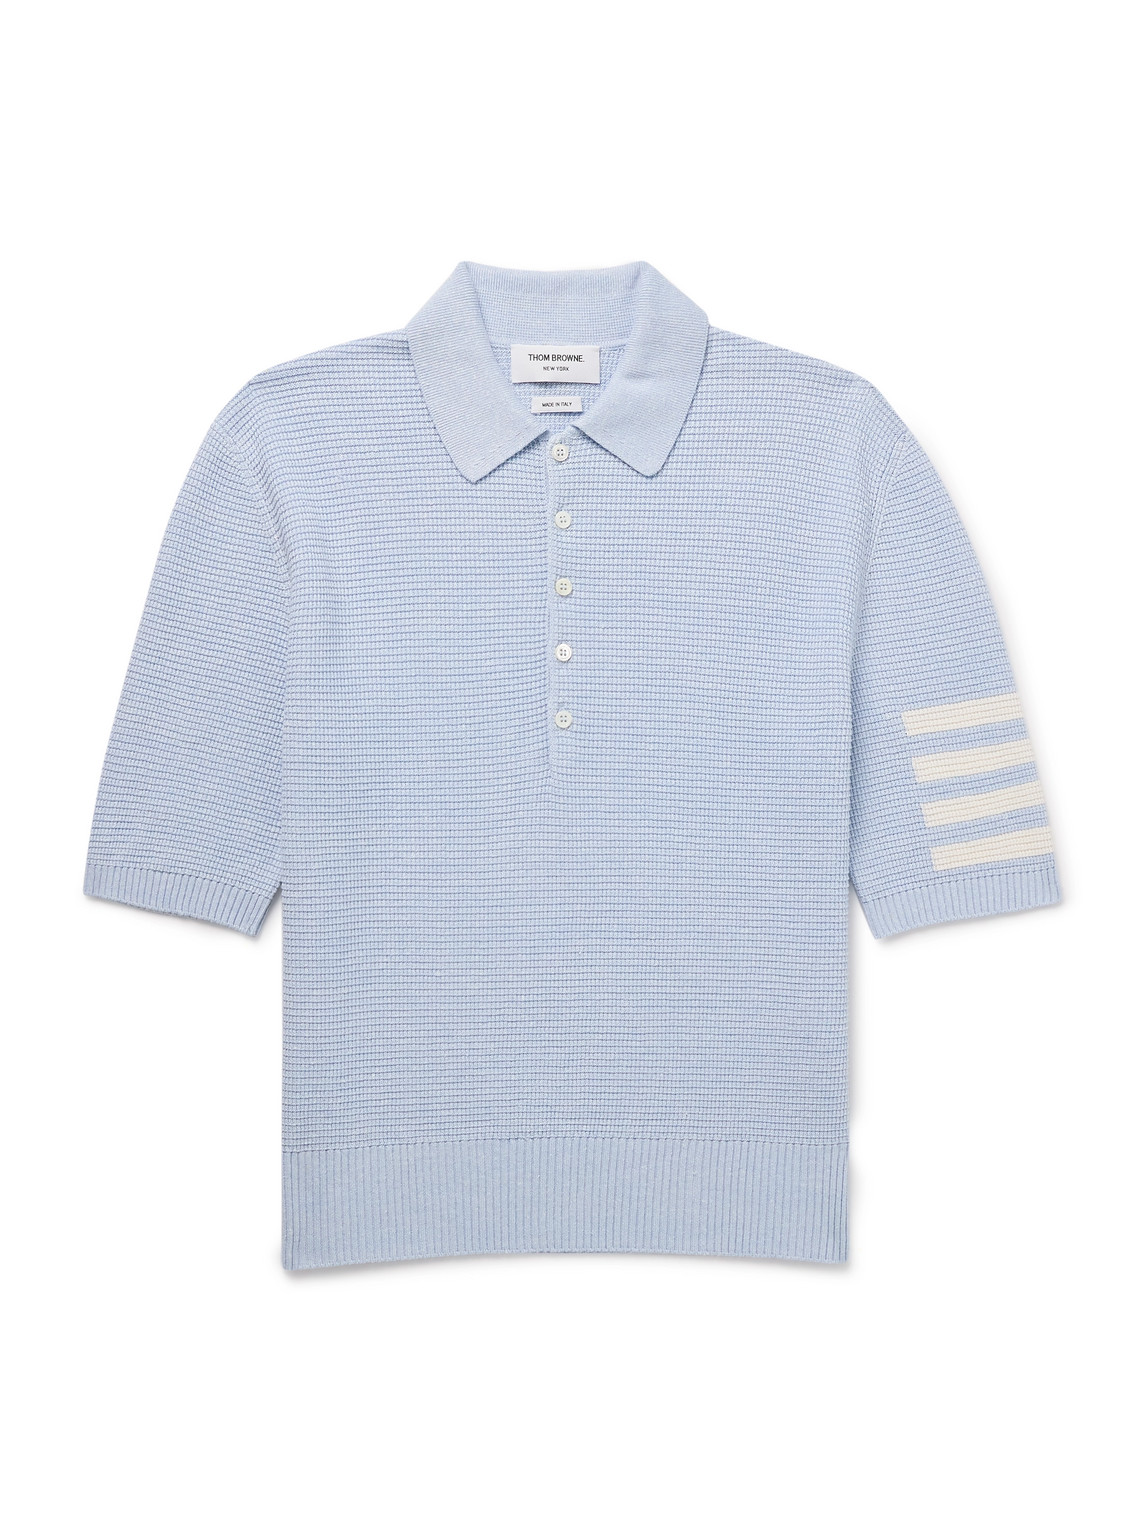 Thom Browne Intarsia-knit Striped Textured Linen And Cotton-blend Polo Shirt In Blue